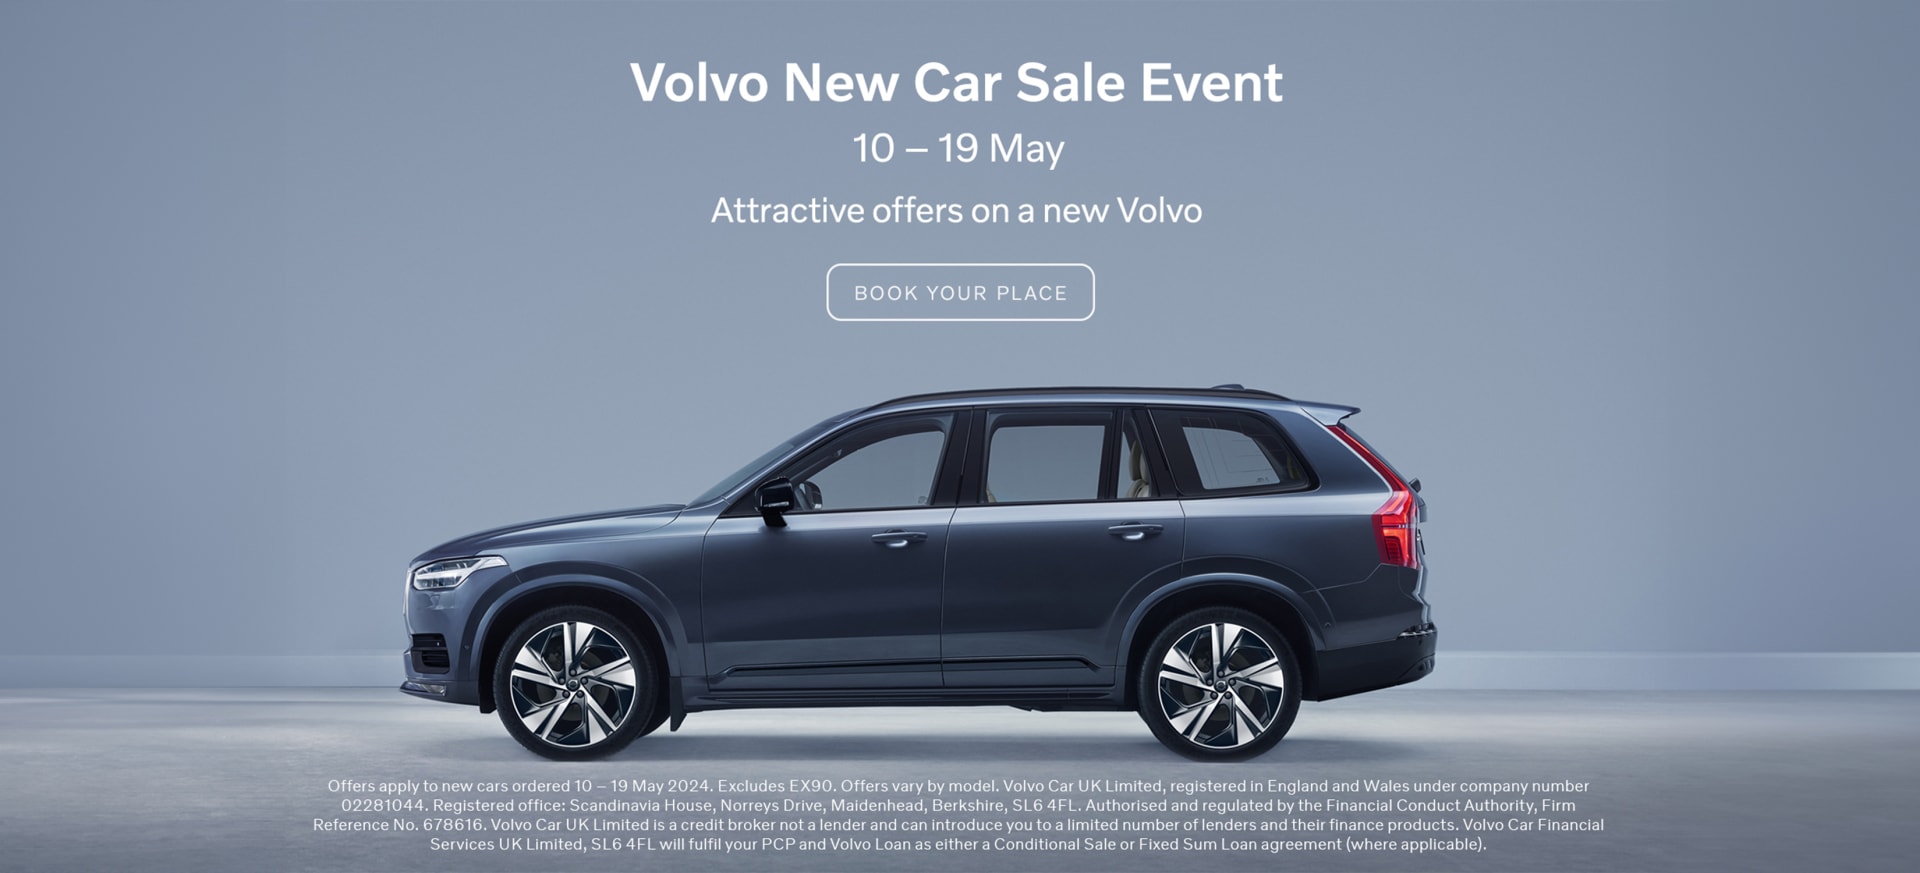 The Volvo New Car Sale Event